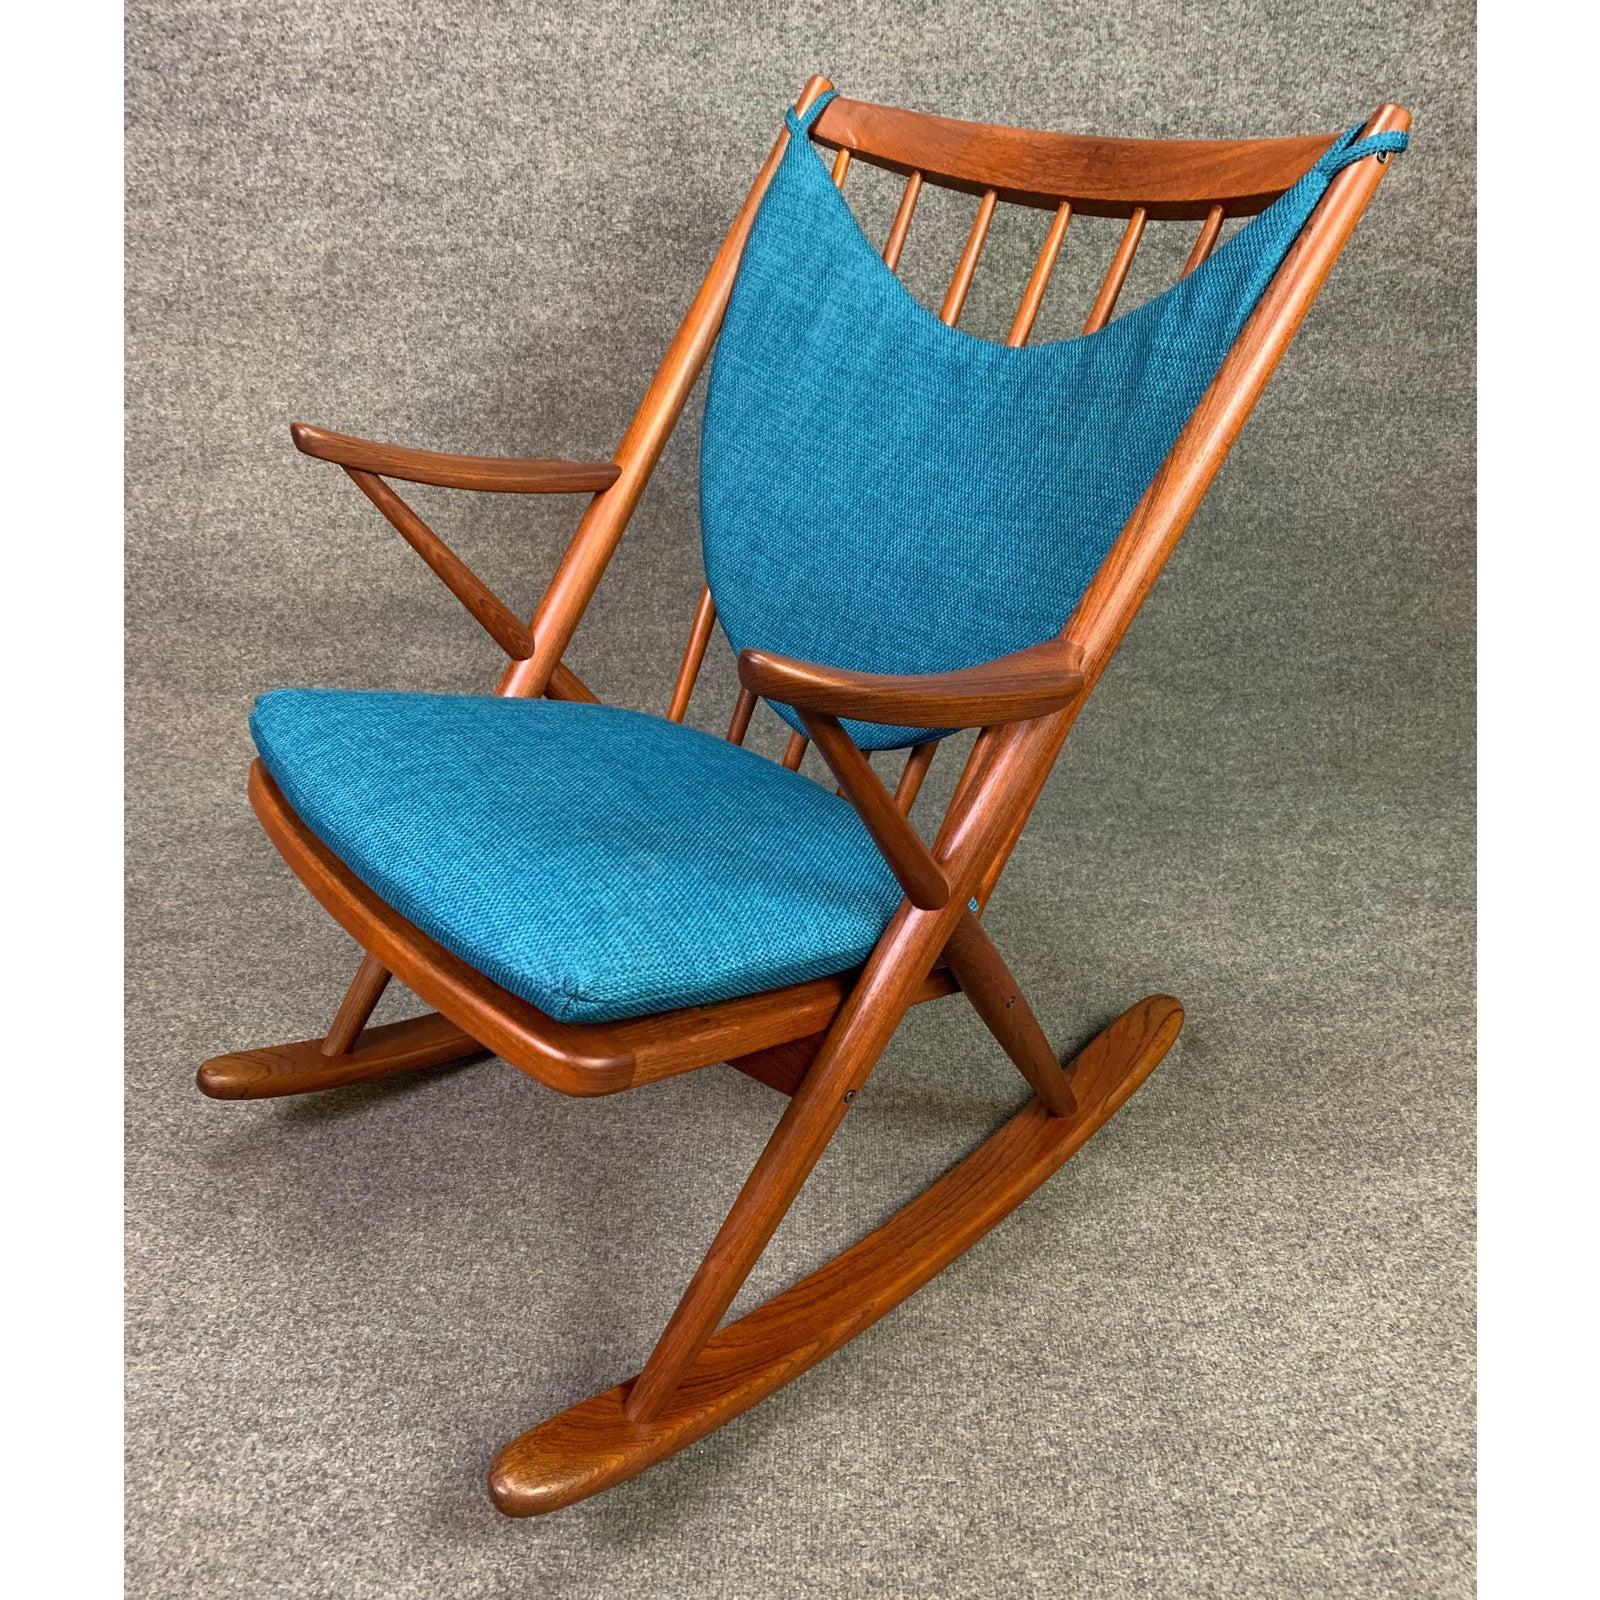 Want to add a Frank Sinatra/Palm Springs vibe to your interior? Well you can...
Here is a beautiful vintage Scandinavian Modern rocker designed by Frank Reenskaug and manufactured by Bramin Mobelfabrik in Denmark in the 1950s.
This comfortable